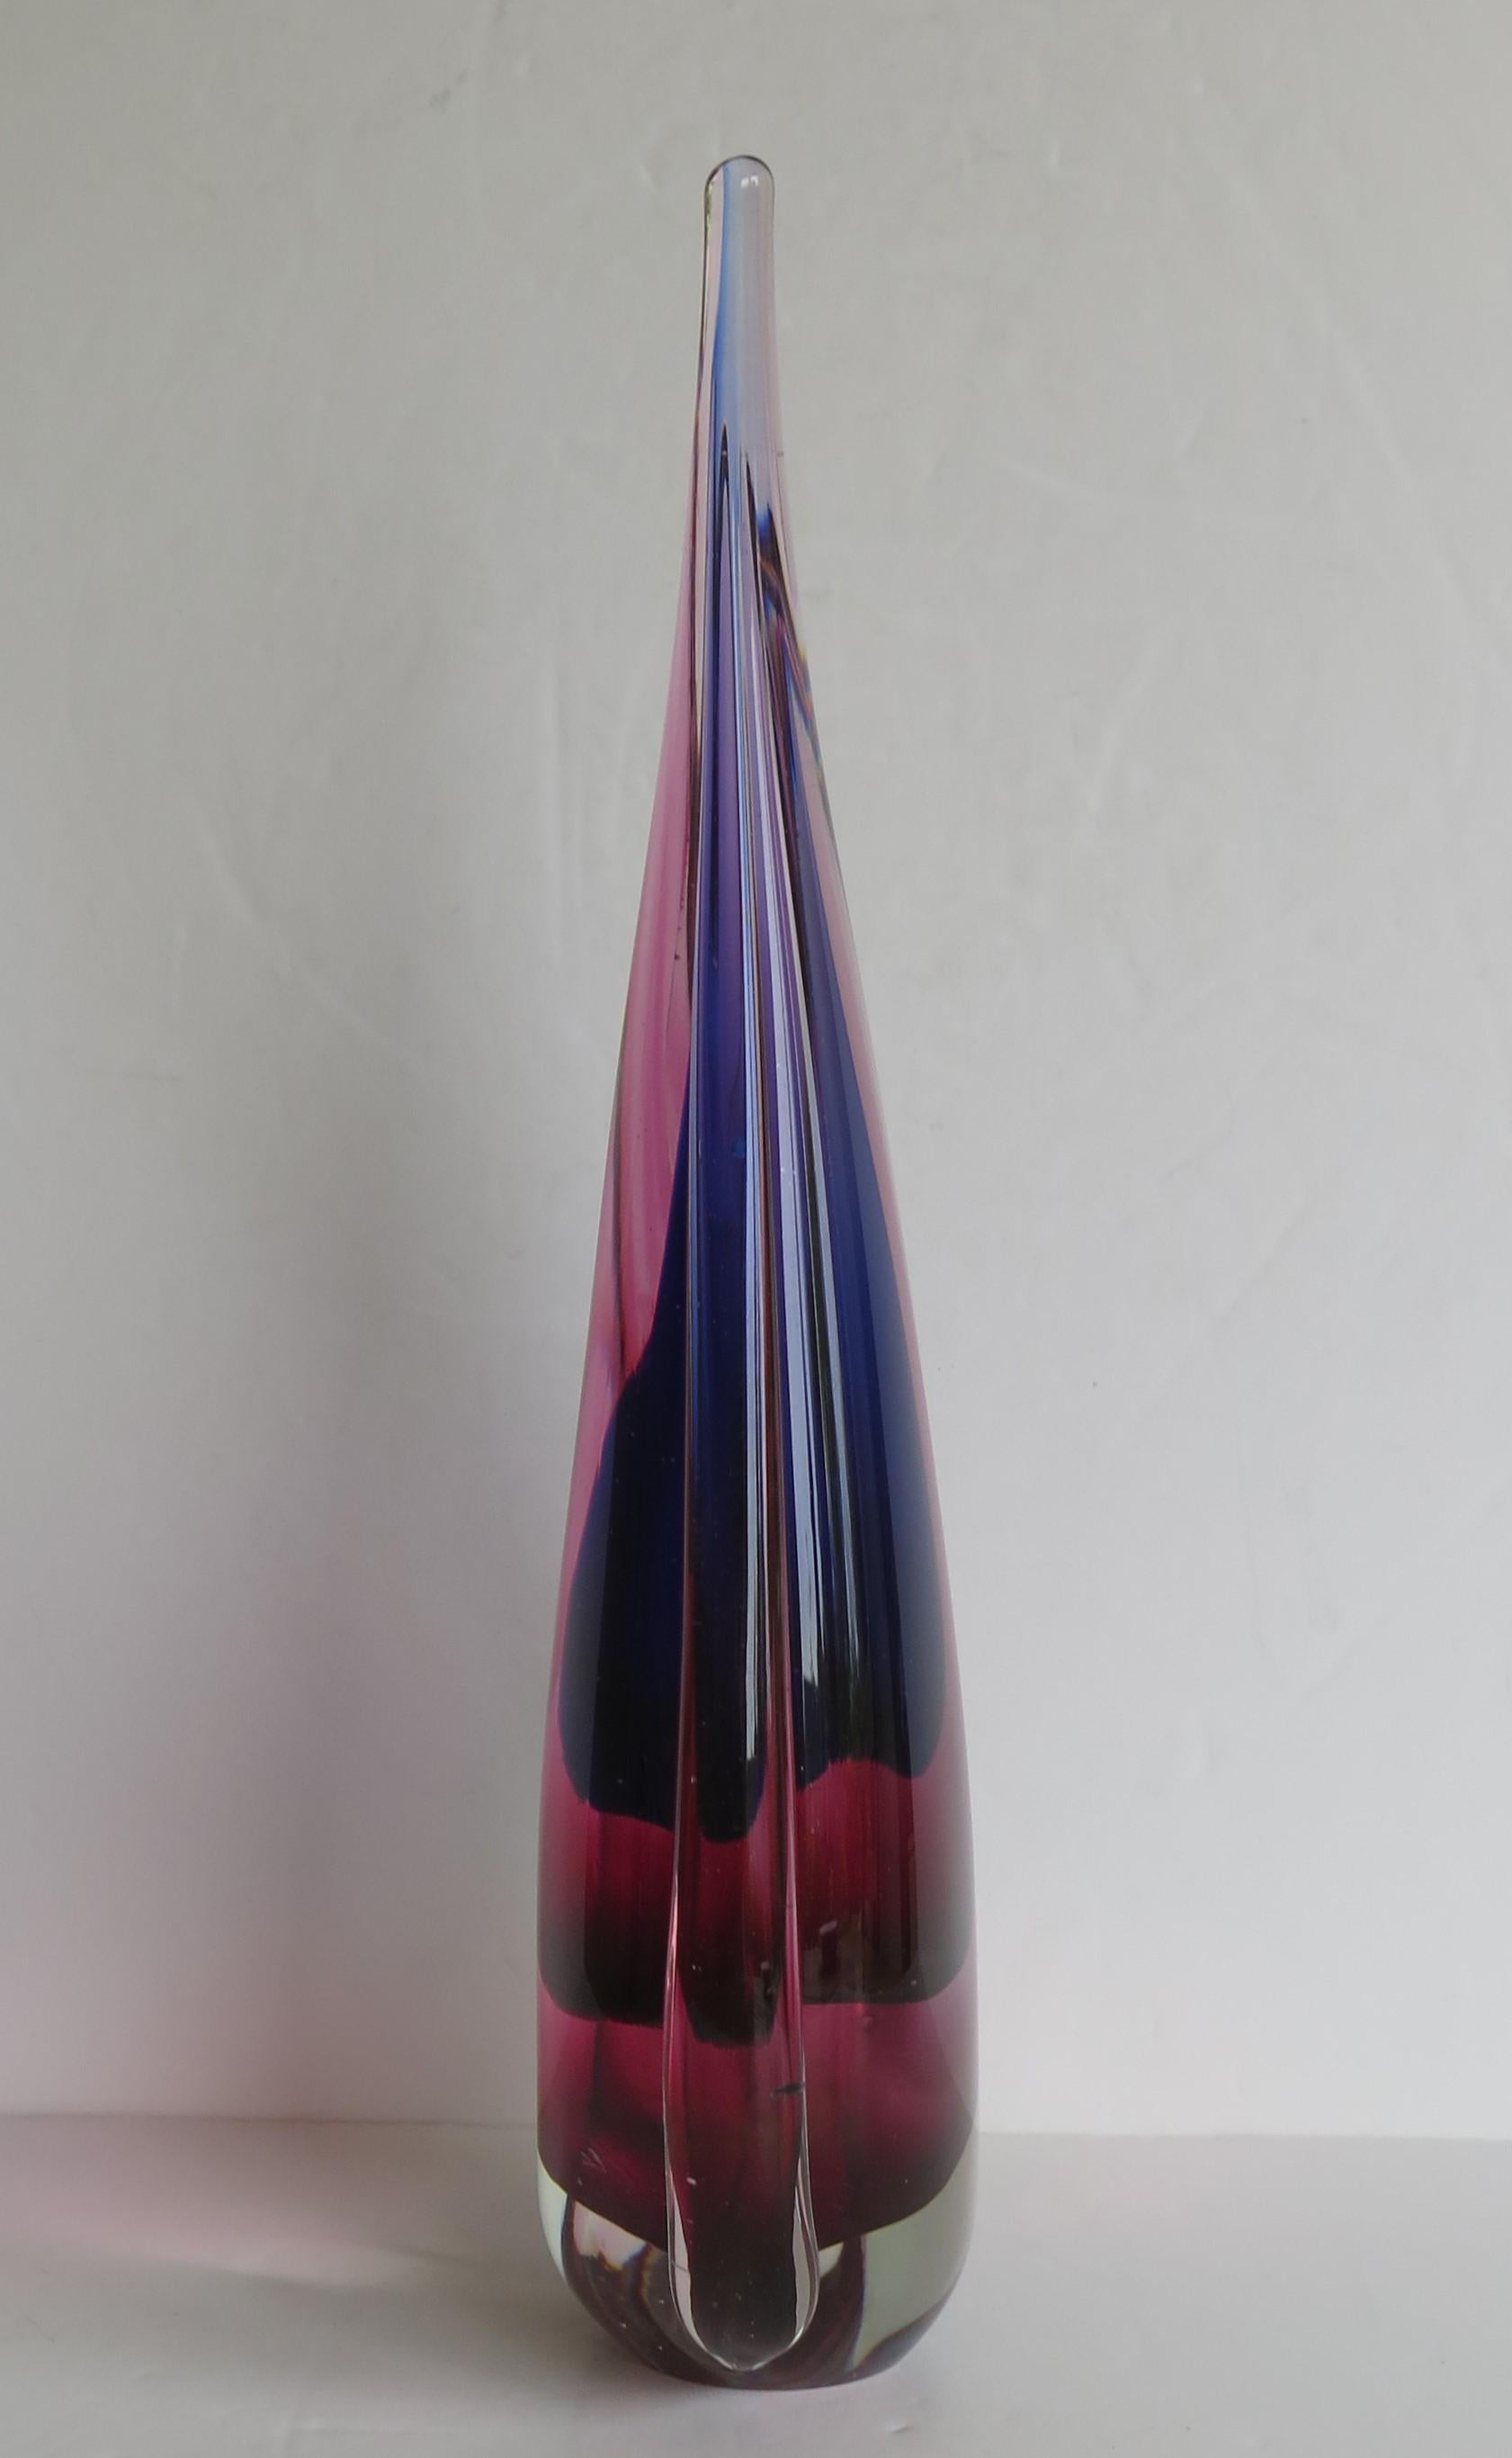 Tall Murano Glass Sommerso Teardrop Sculpture by Flavio Poli, Italy, circa 1950s For Sale 1